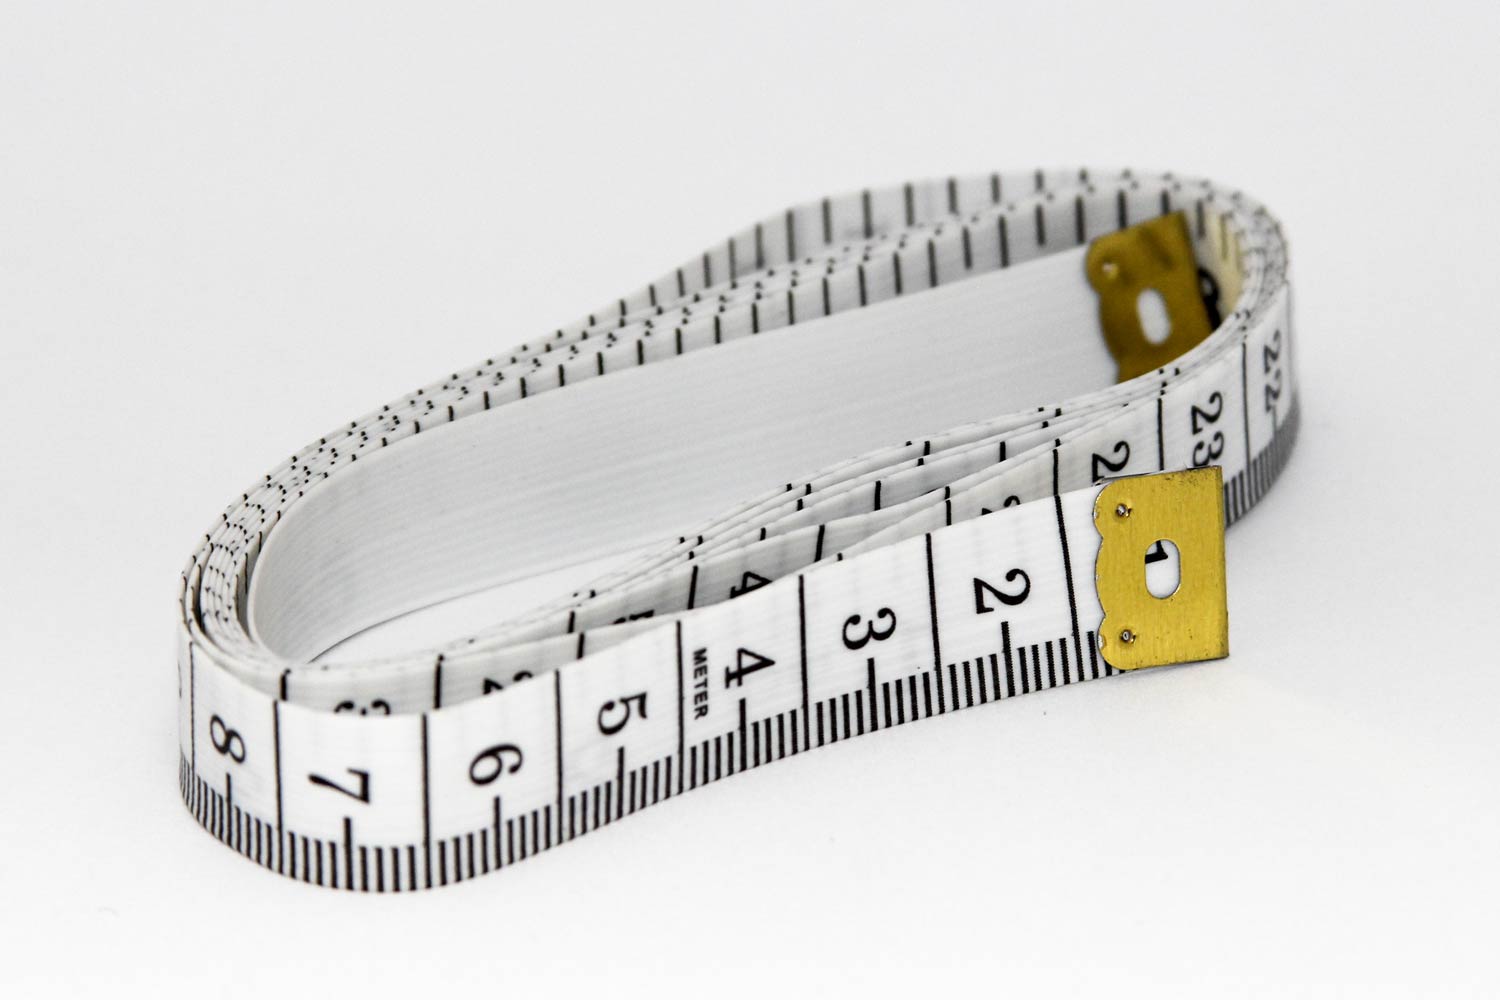 Tape Measure - For Measuring Yourself